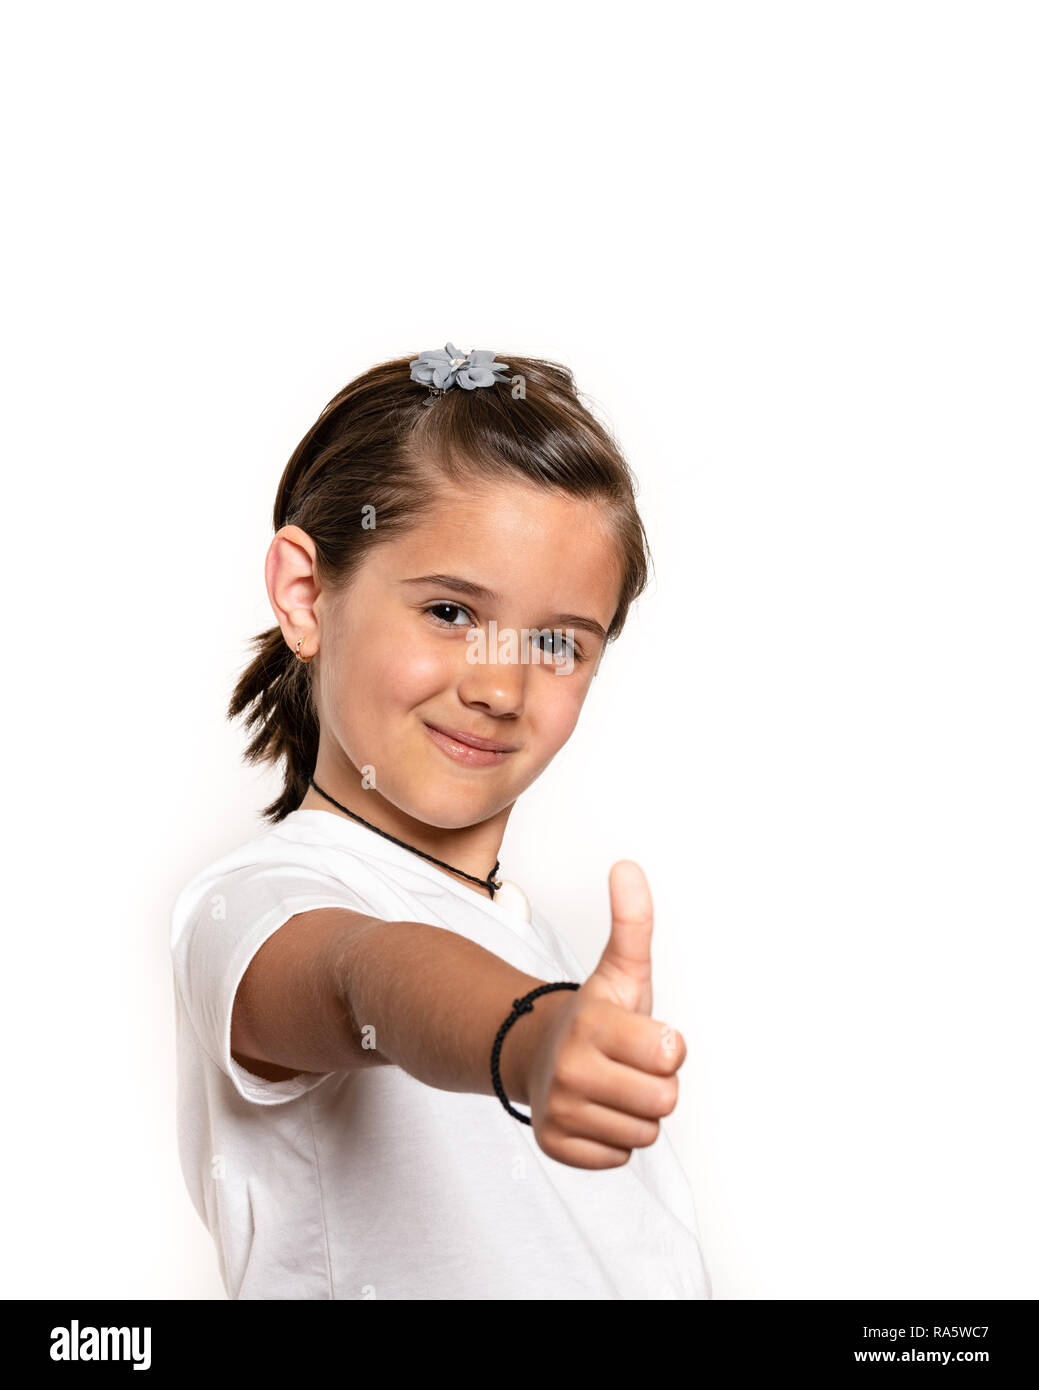 Young primary school aged school girl showing thumbs up. Focus on face. Stock Photo